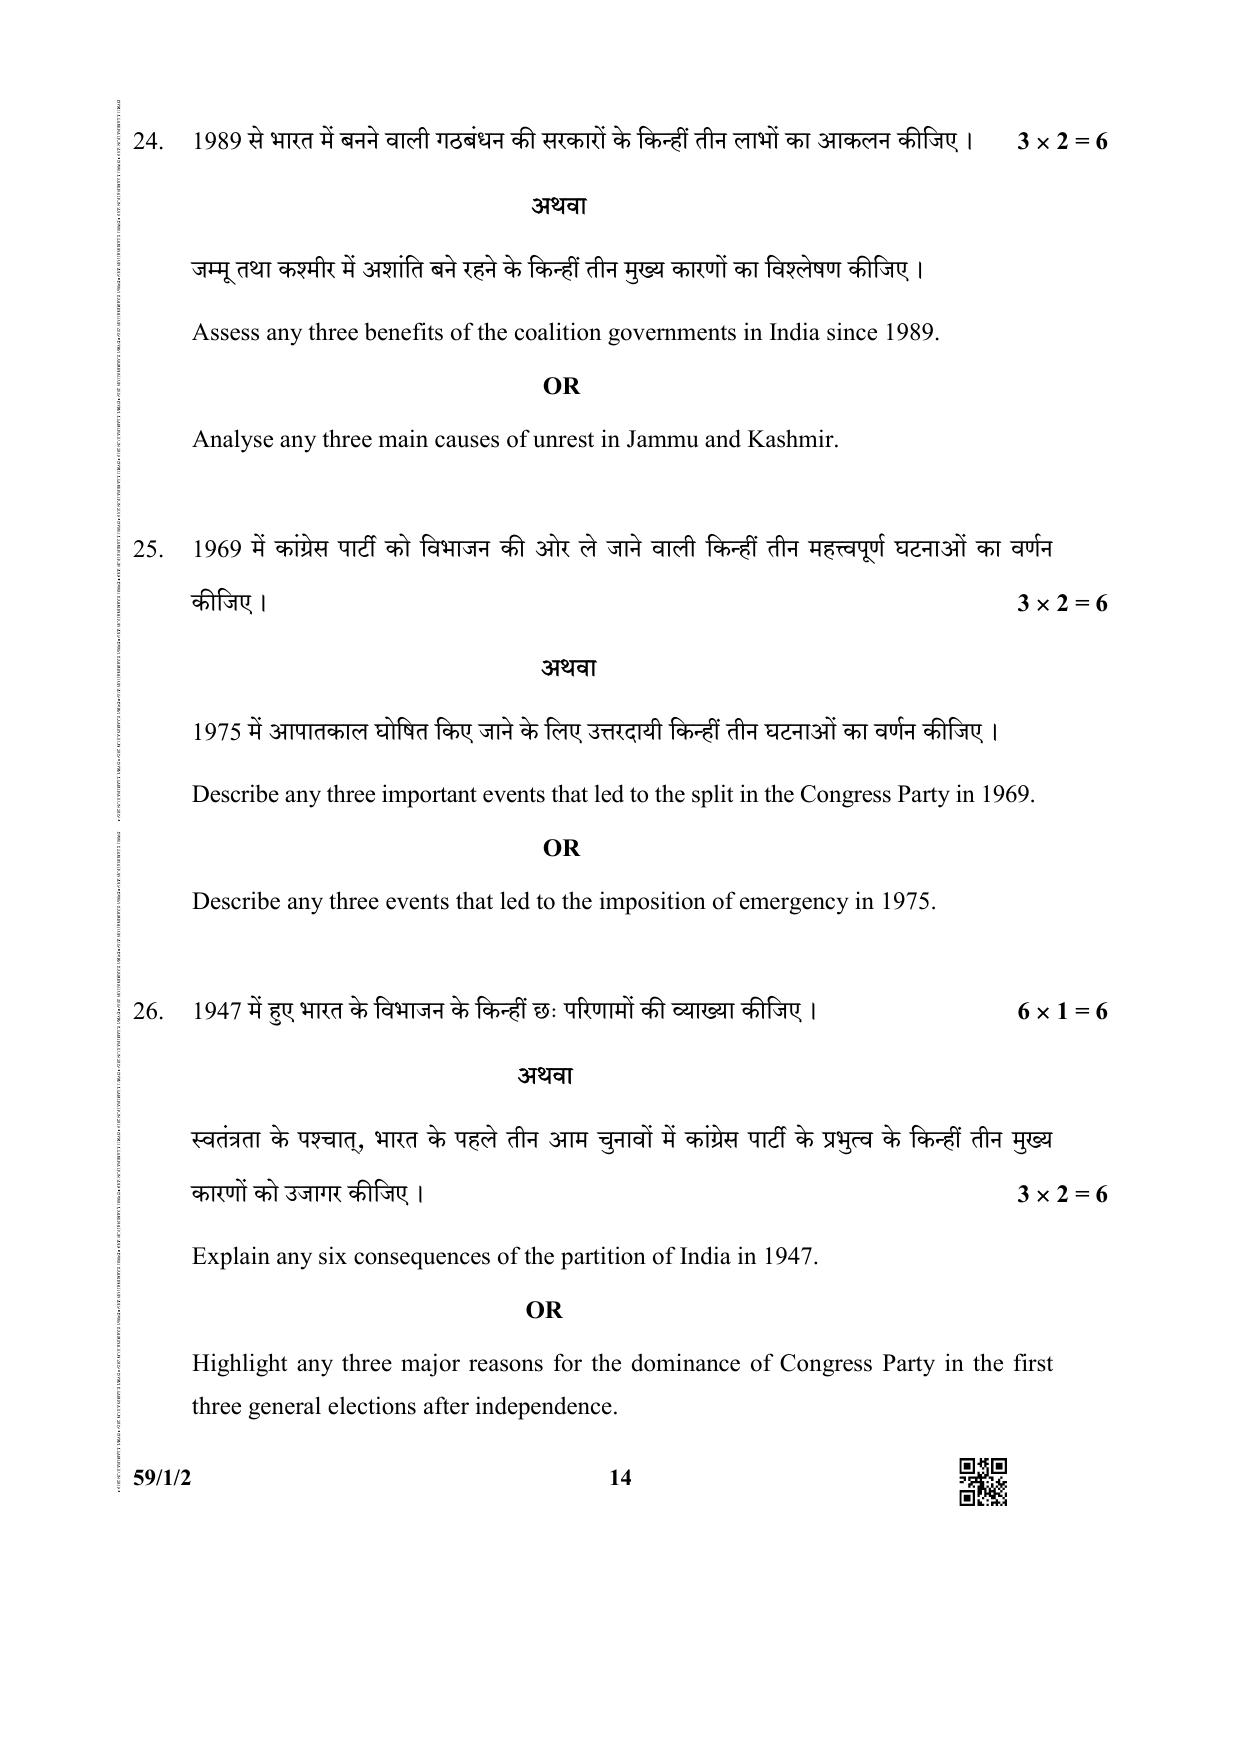 CBSE Class 12 59-1-2 (Political Science) 2019 Question Paper - Page 14